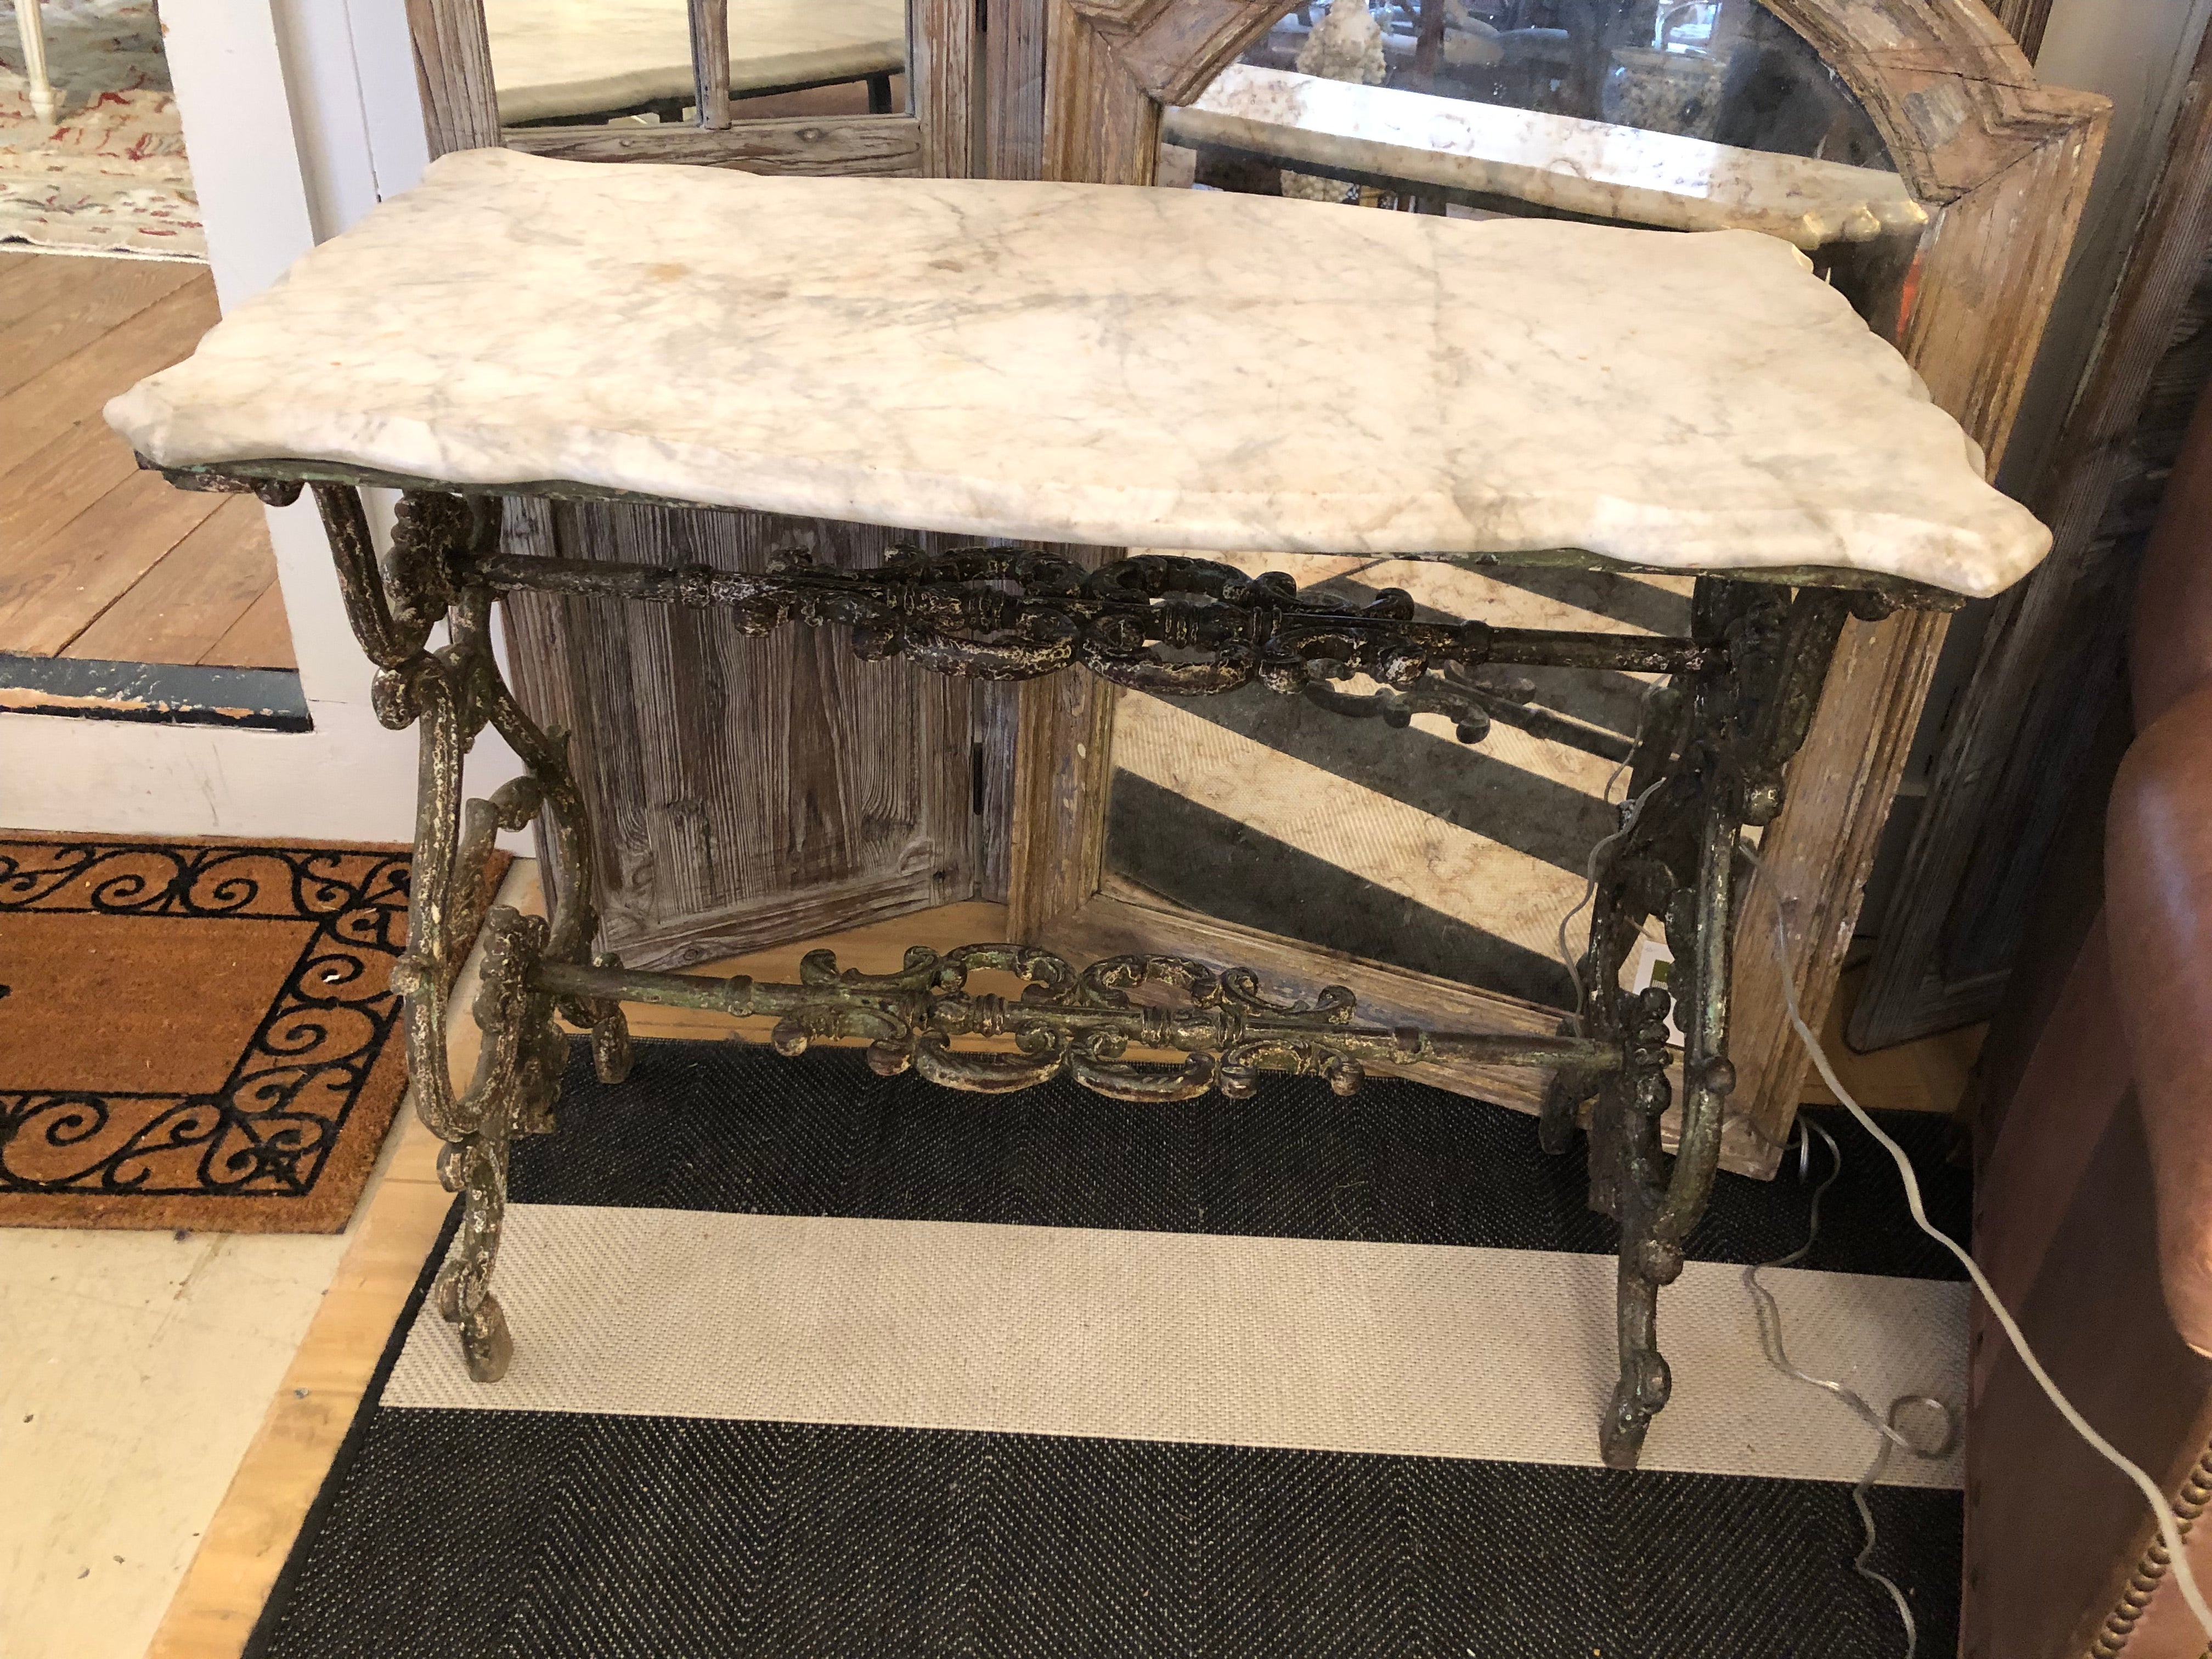 Rare and splendid French patisserie table having stunning curlicue cast iron base and scalloped bevelled rectangular marble top.  Would make a lovely console or small writing desk.